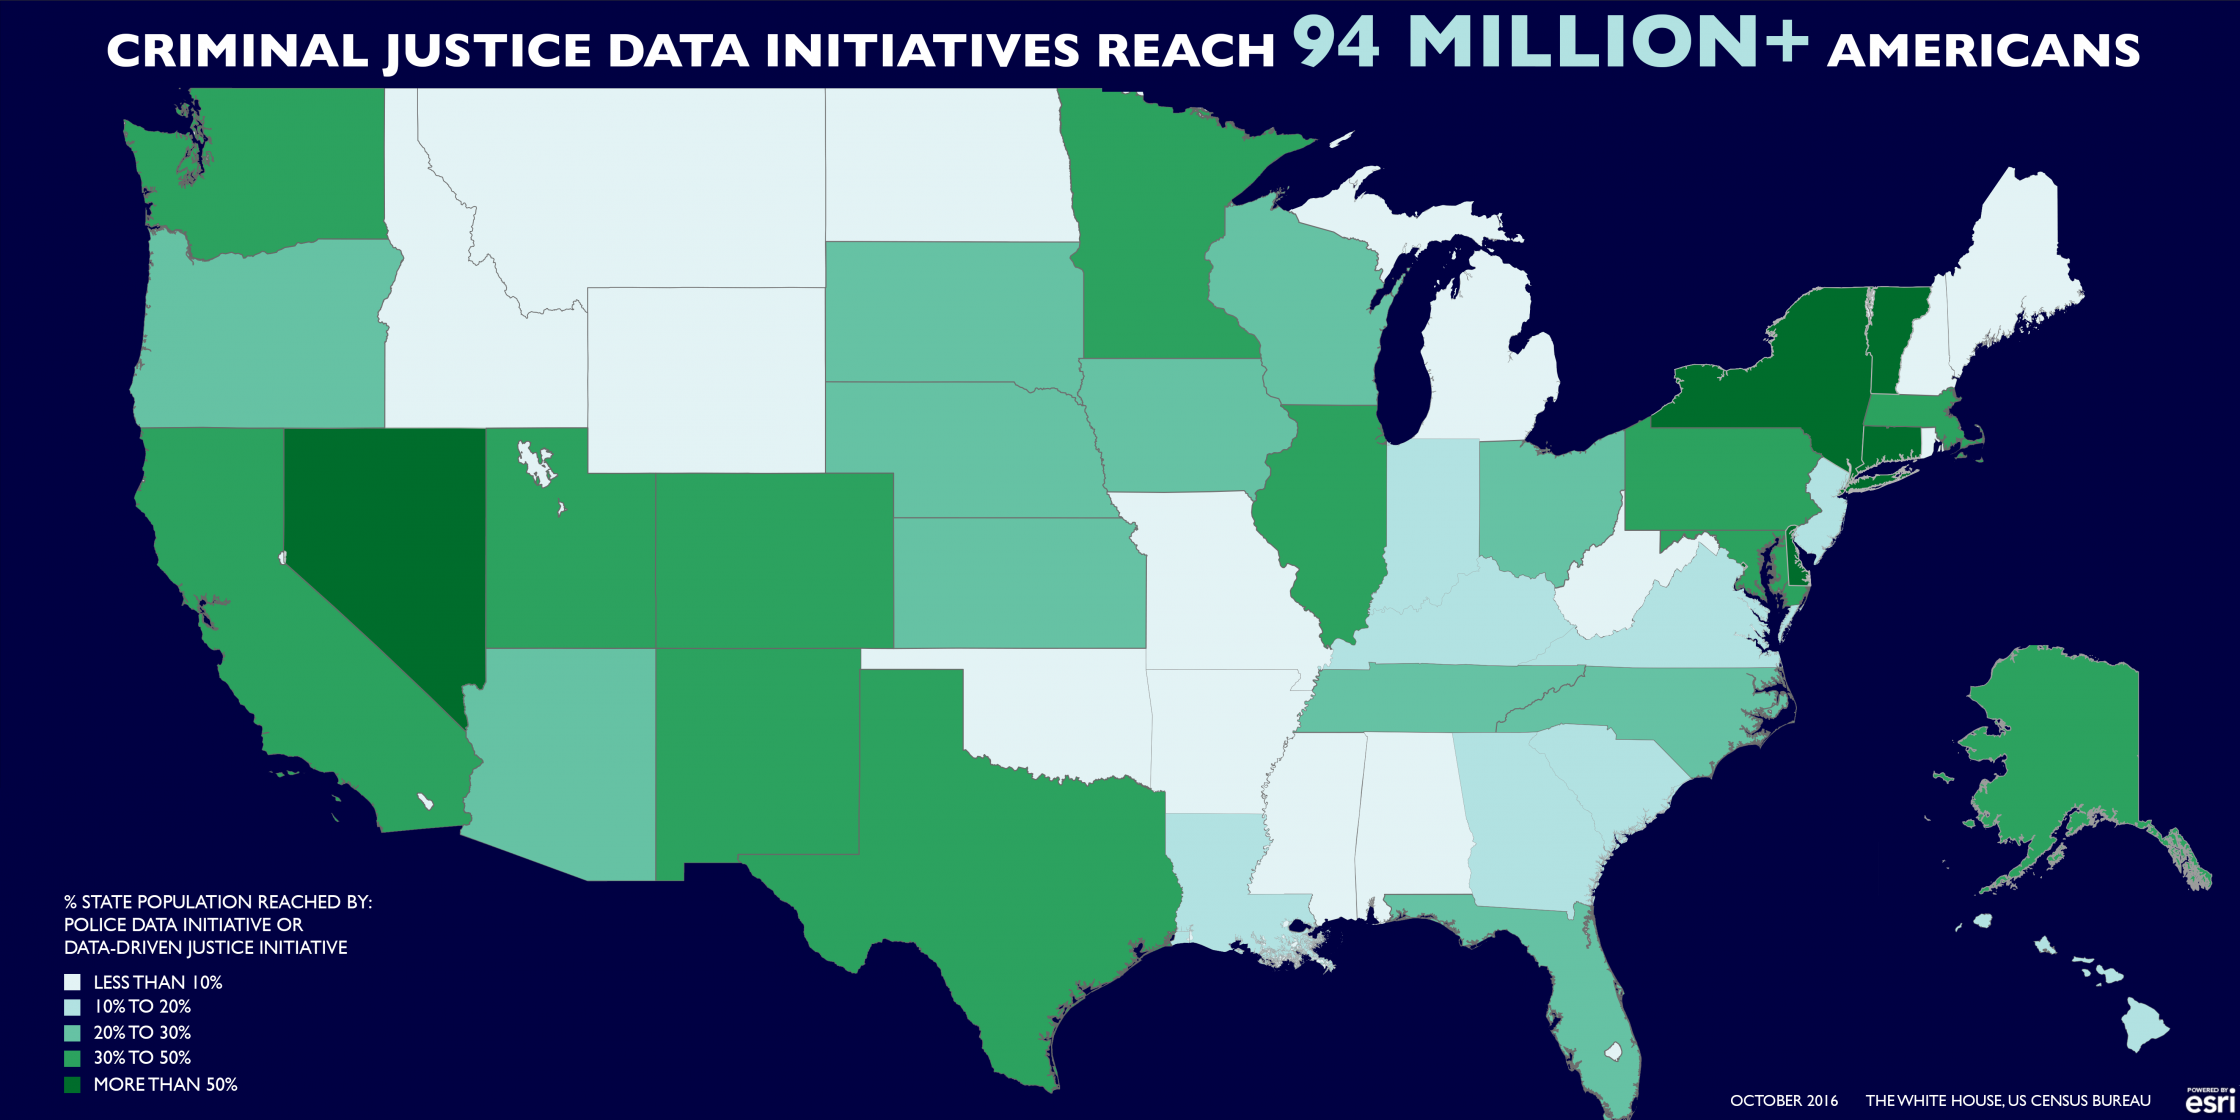 "Criminal Justice Data Initiatives Reach 94+ Million+ Americans”. A U.S. map is presented with the Percent State Population reached by the Police Data Initiative or Data-Driven Justice Initiative. The higher percentage states include Nevada, New York, Vermont, and Connecticut. Overall the map is meant to demonstrate reach across the country. 